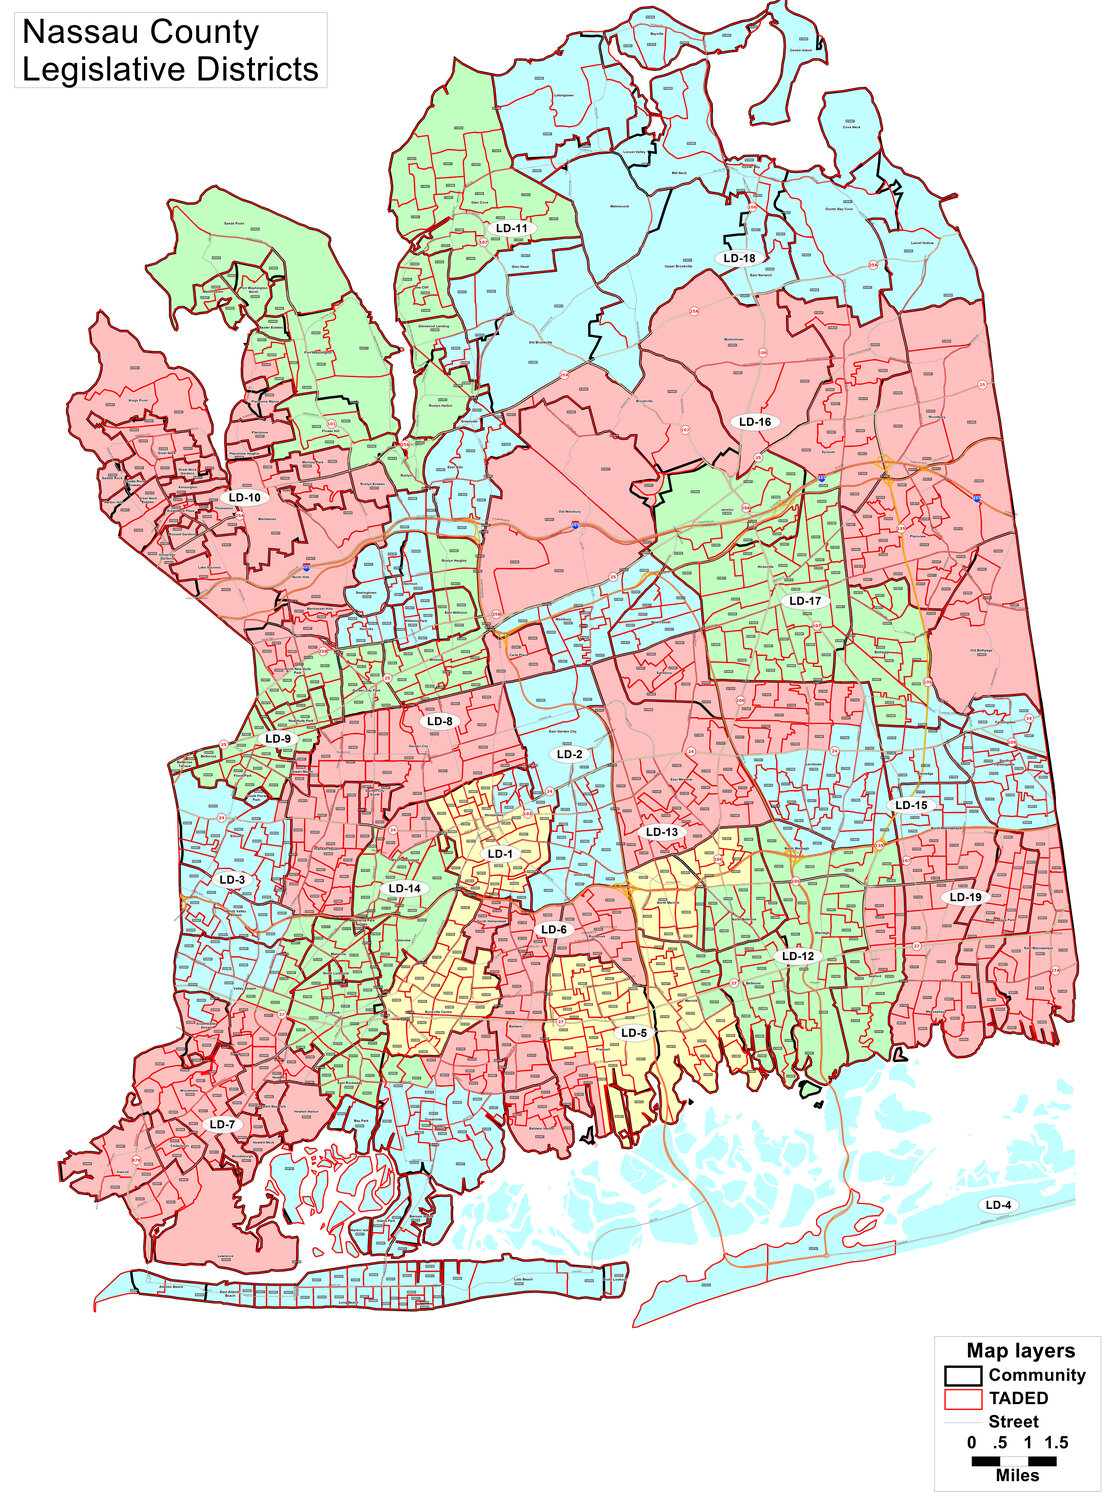 Democrats claim the recently approved district map for the Nassau County Legislature benefits Republicans — who hold a majority in Mineola — while putting any opposition at a disadvantage. They now want a judge to make a final determination.